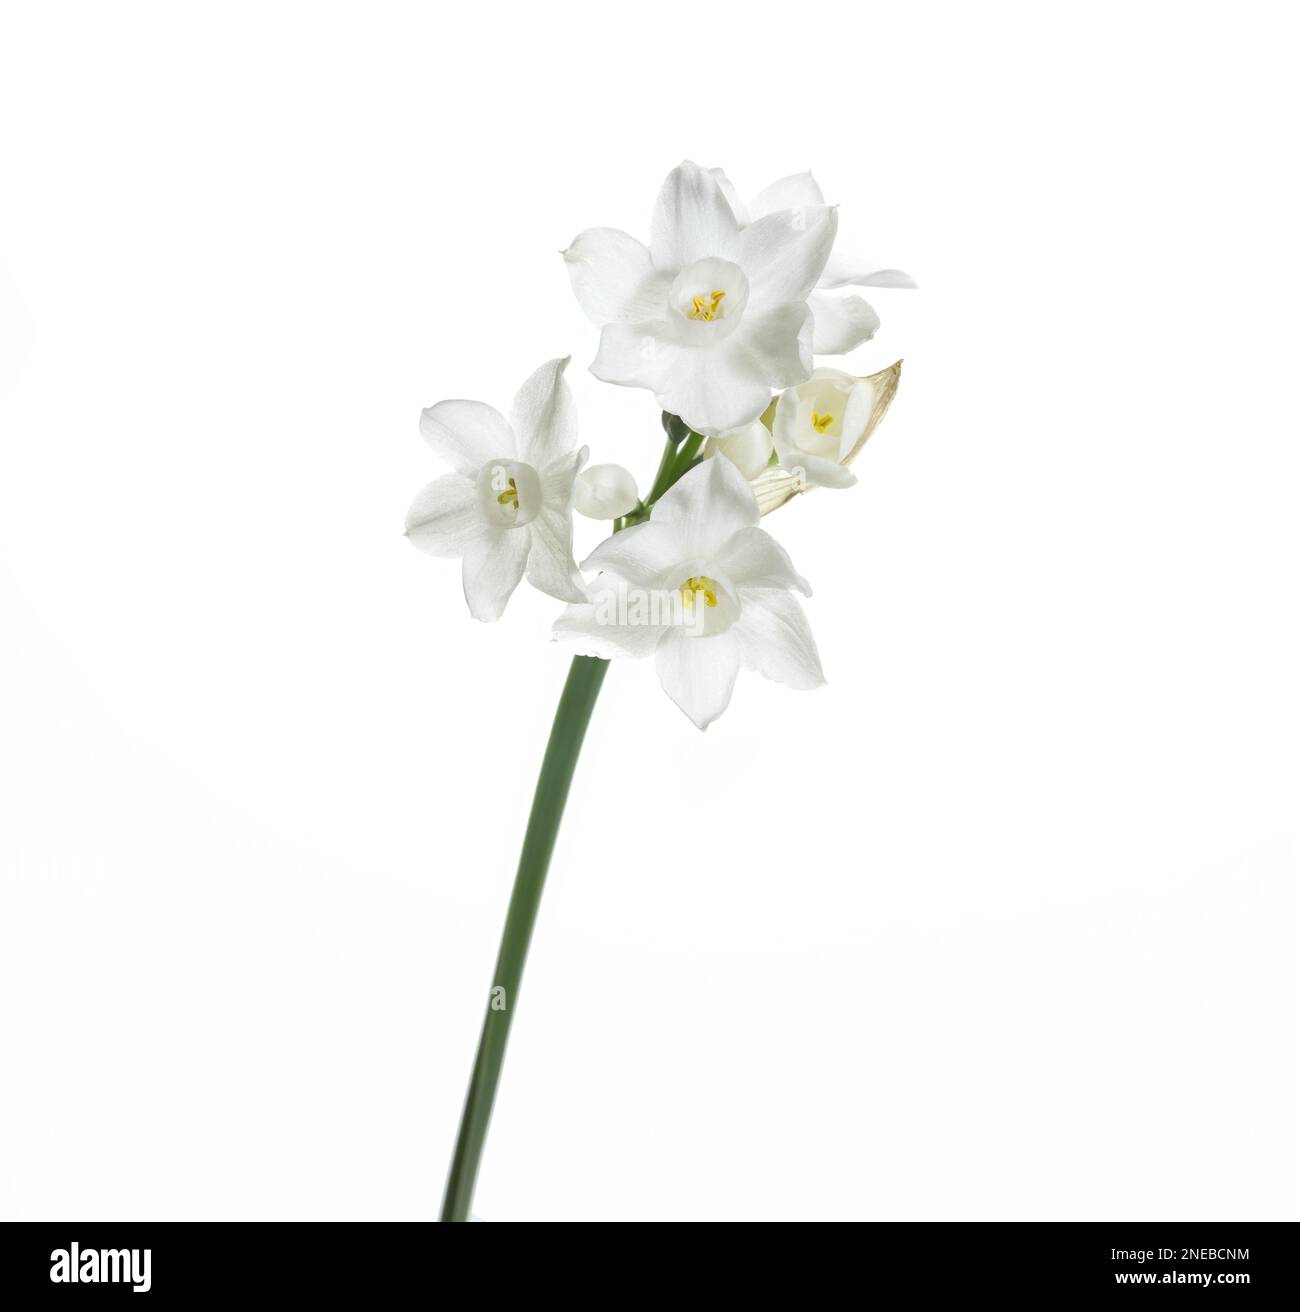 White flower of Narcissus papyraceus plant isolated on white background, common name paperwhite Stock Photo